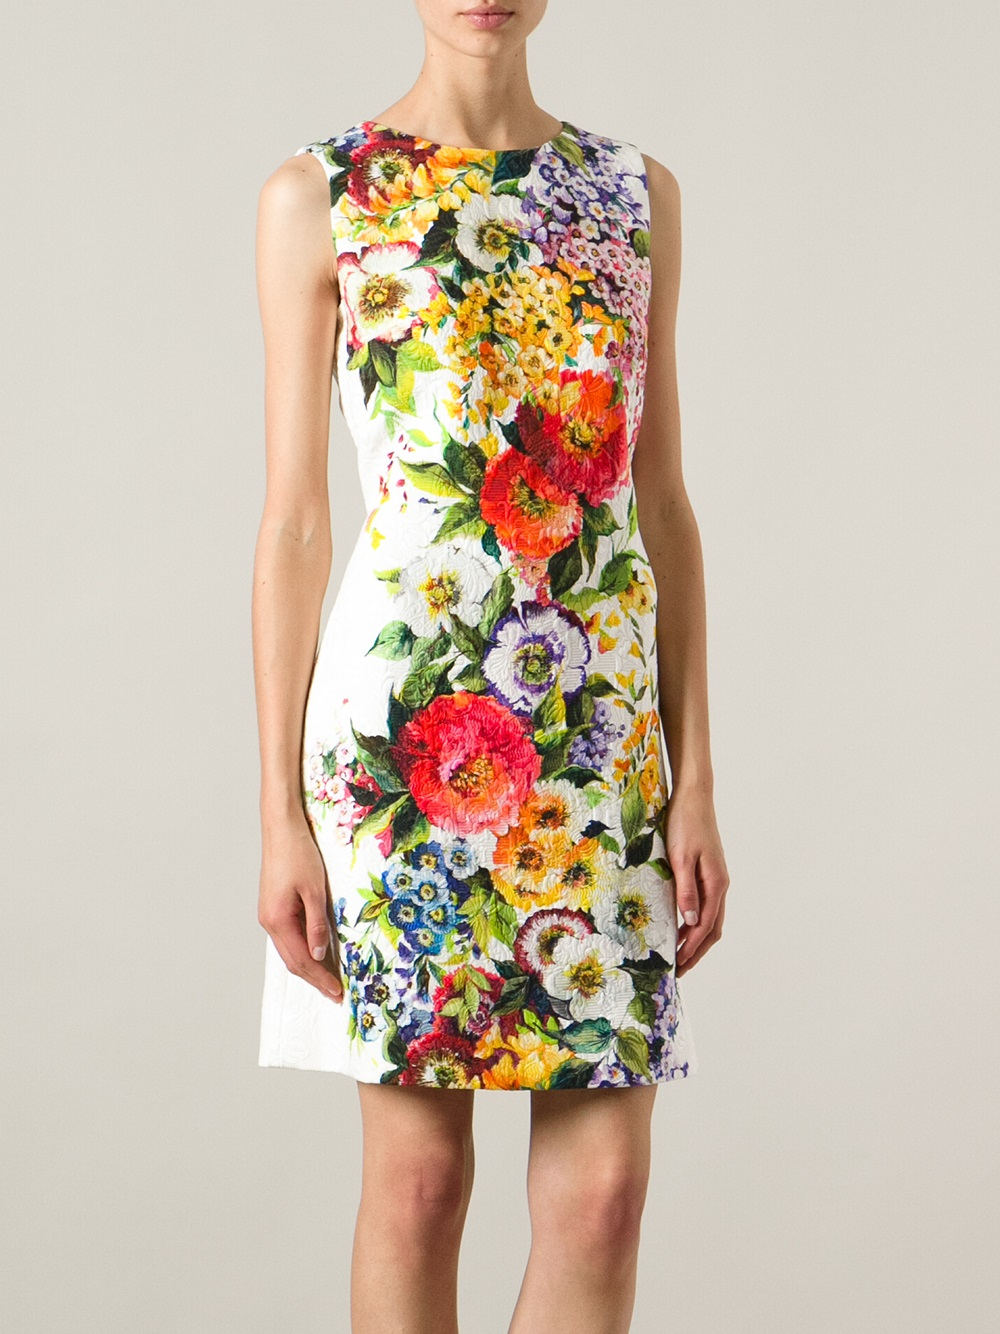 floral dress dolce and gabbana